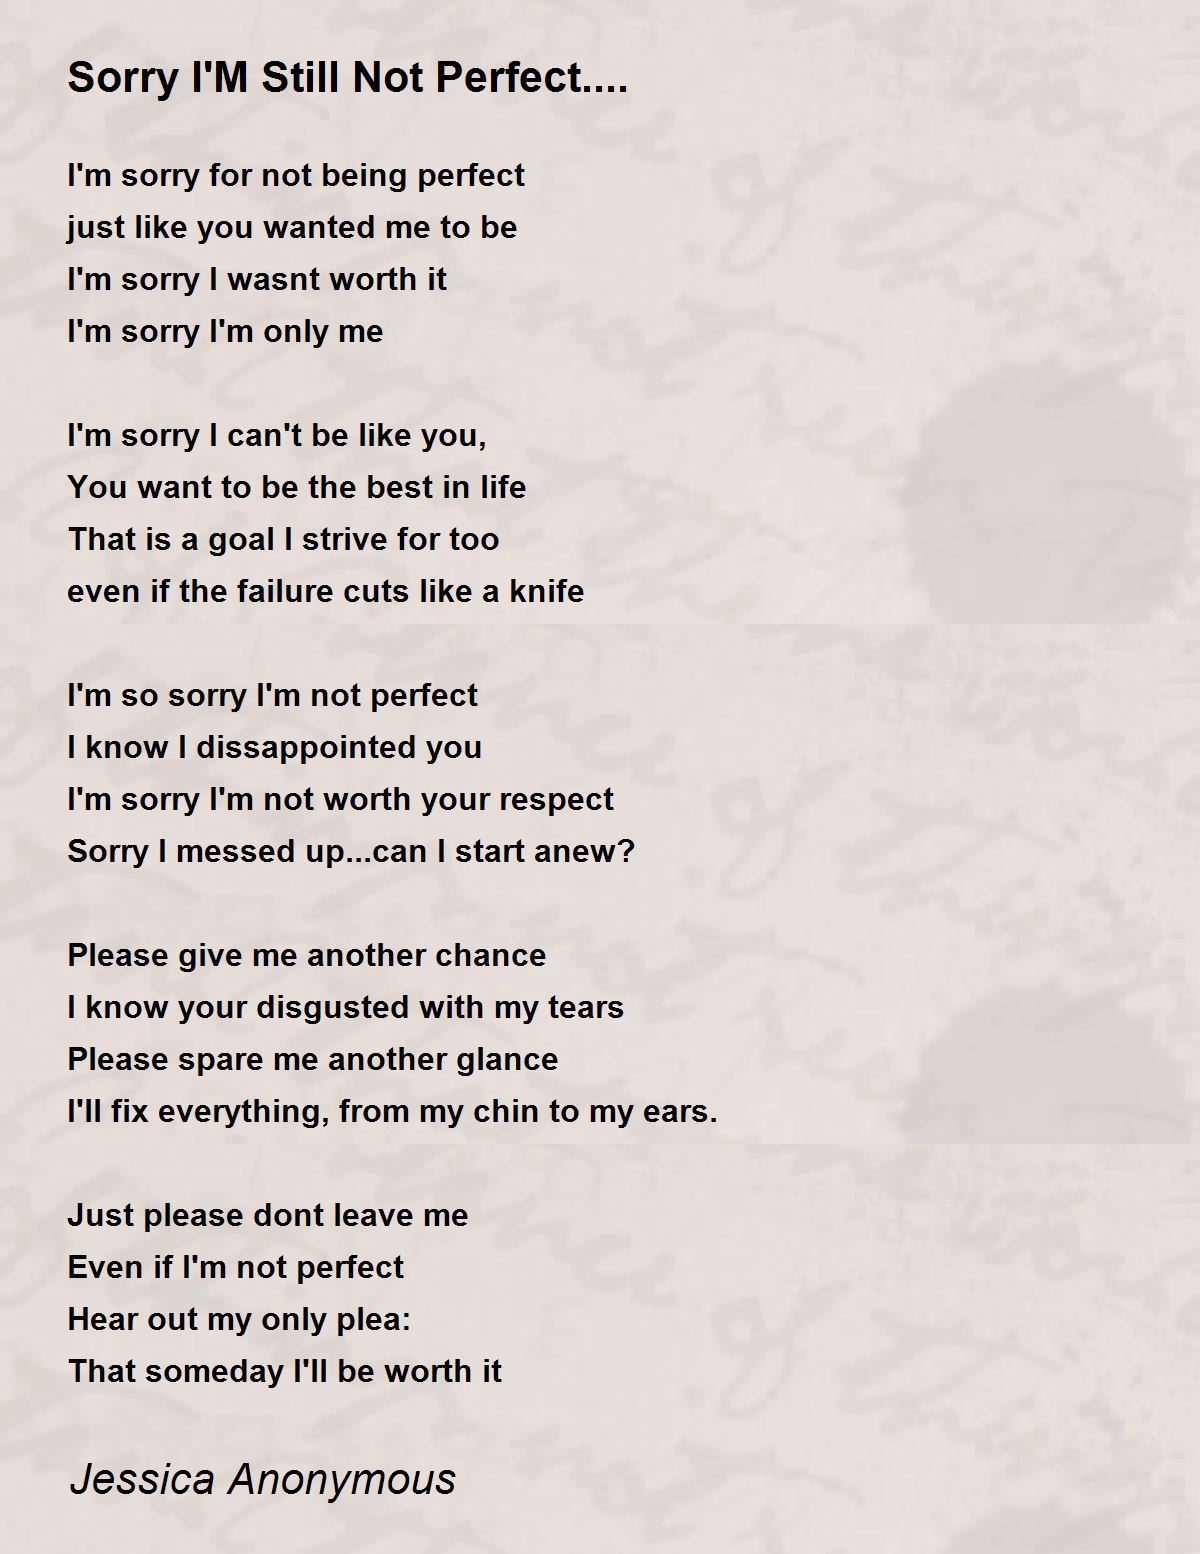 Sorry I'M Still Not Perfect.... poem summary, analysis and comments. 